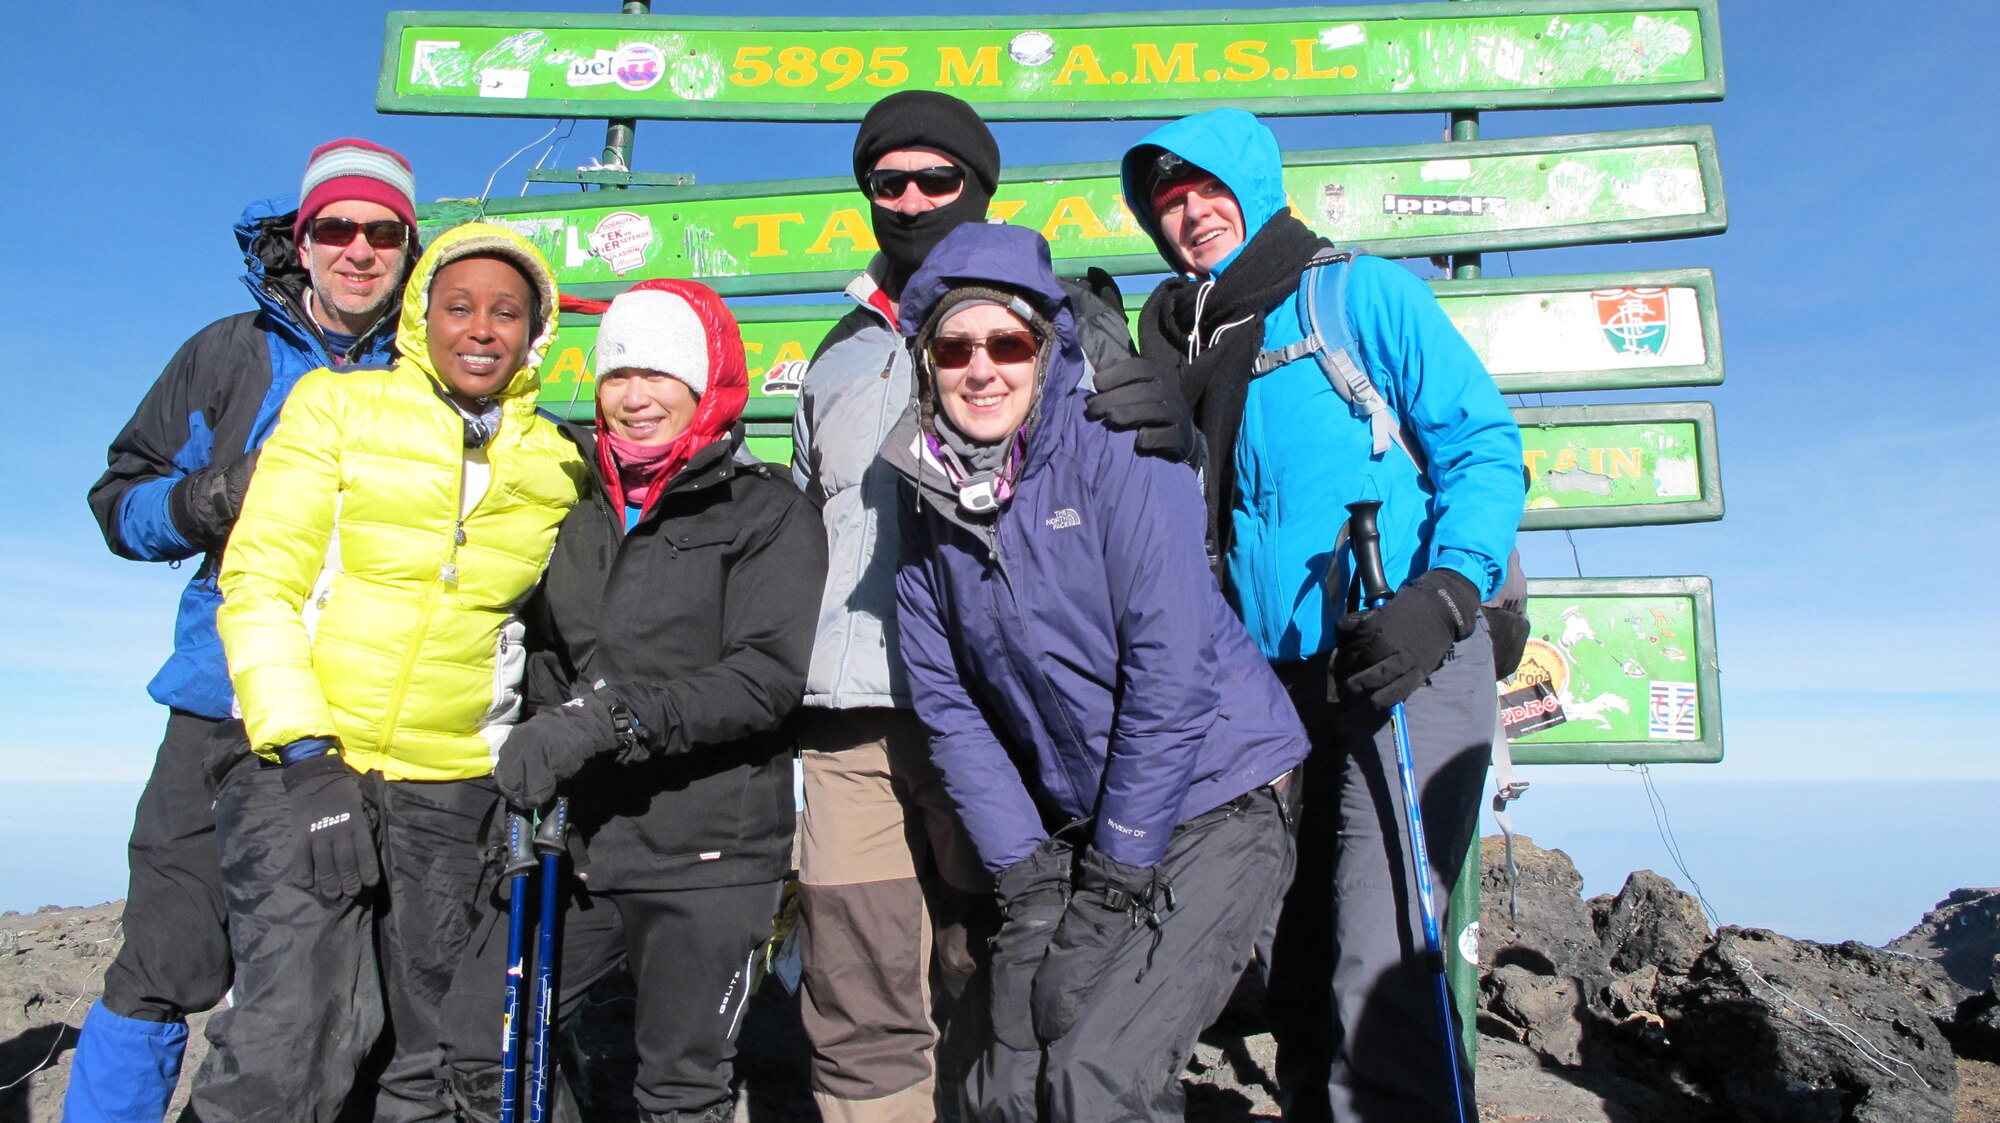 1st Lt. Diana Wong, third from left, assigned to the 509th Force Support Squadron at Whiteman Air Force Base, Mo., poses with part of her group after they reach the summit of Mount Kilimanjaro in Tanzania, Feb. 14, 2013. The group of 10 climbers was accompanied by local guides, a chef and porters who carried their gear. (Courtesy photo/Released)